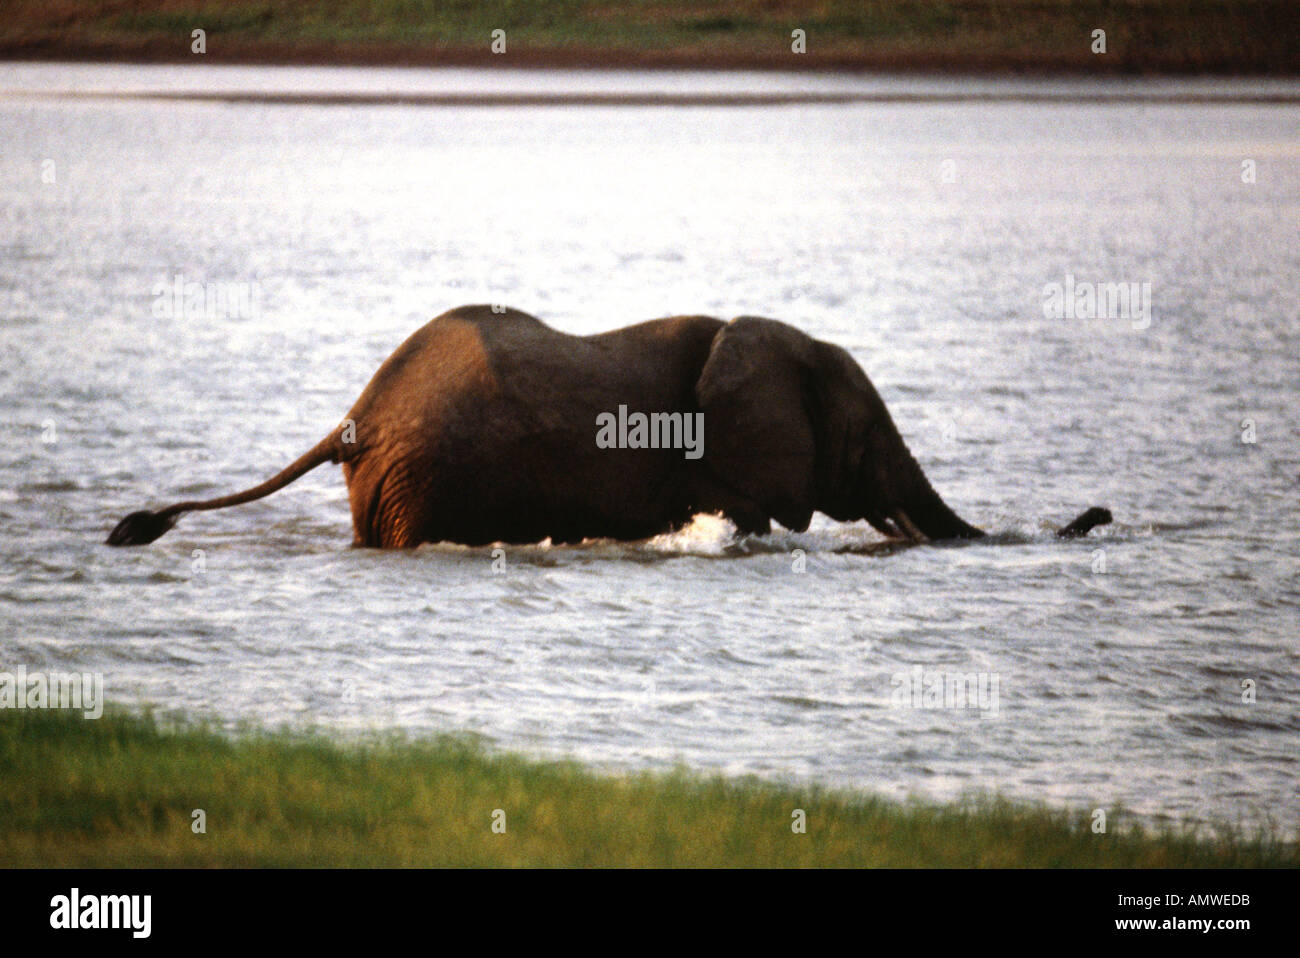 A solitary elephant crosses a lake in Tanzania's Selous Game Reserve Stock Photo